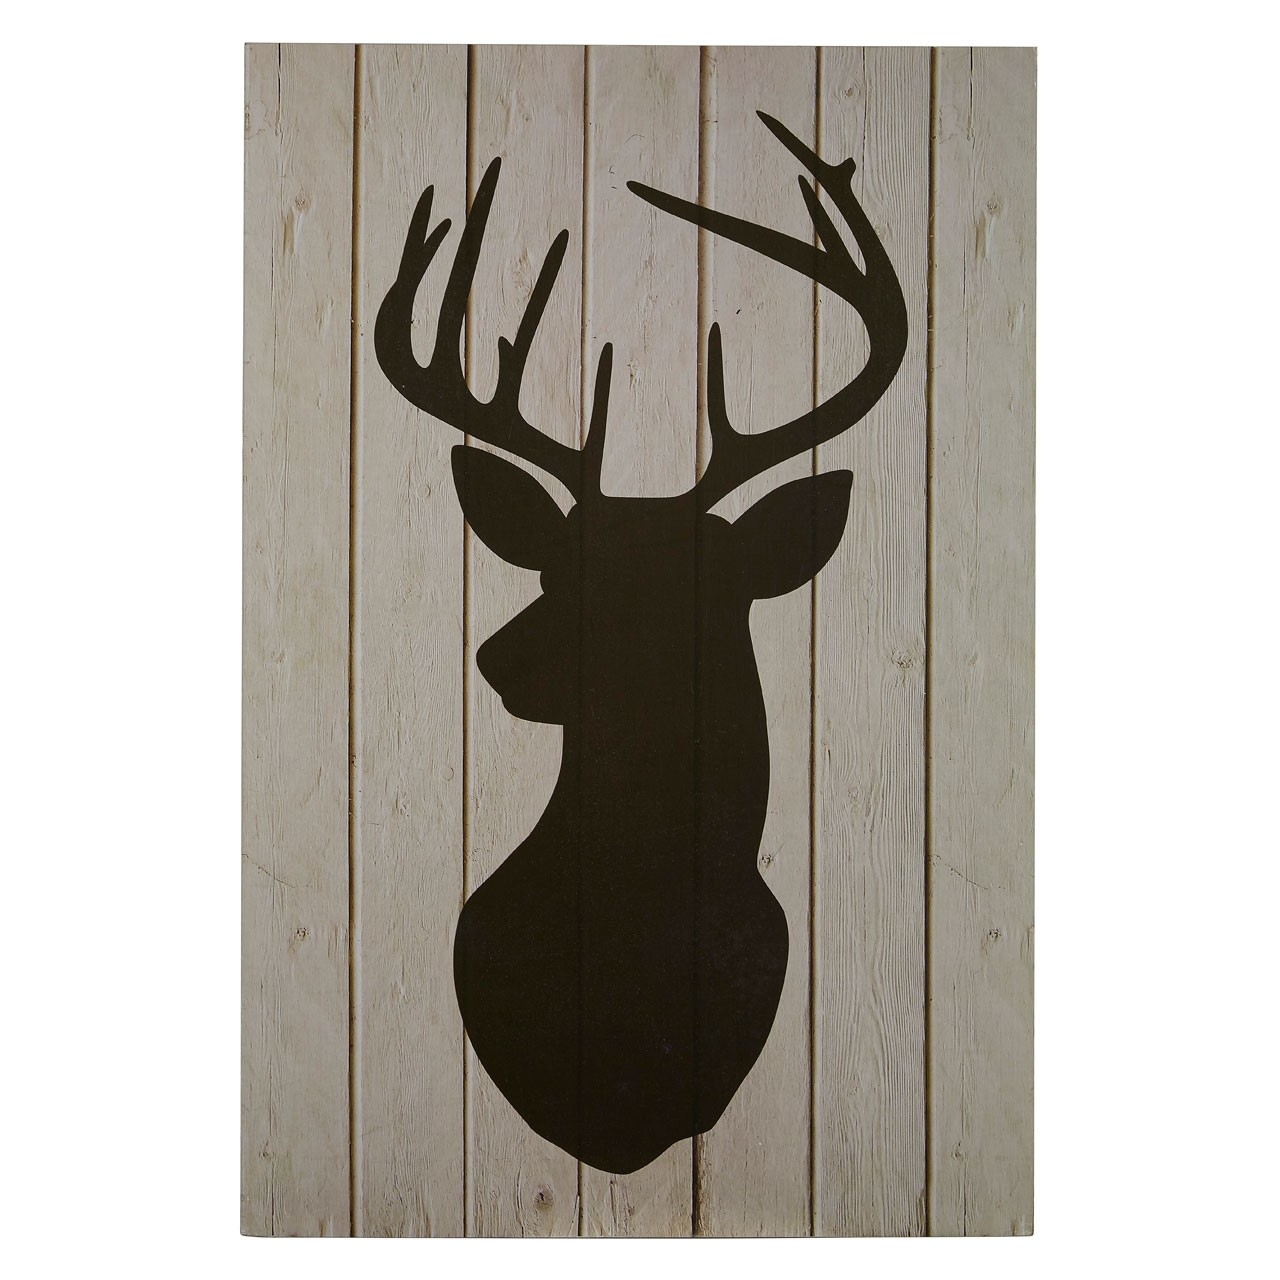 Prime Furnishing Stag Silhouette Wall Plaque - Black